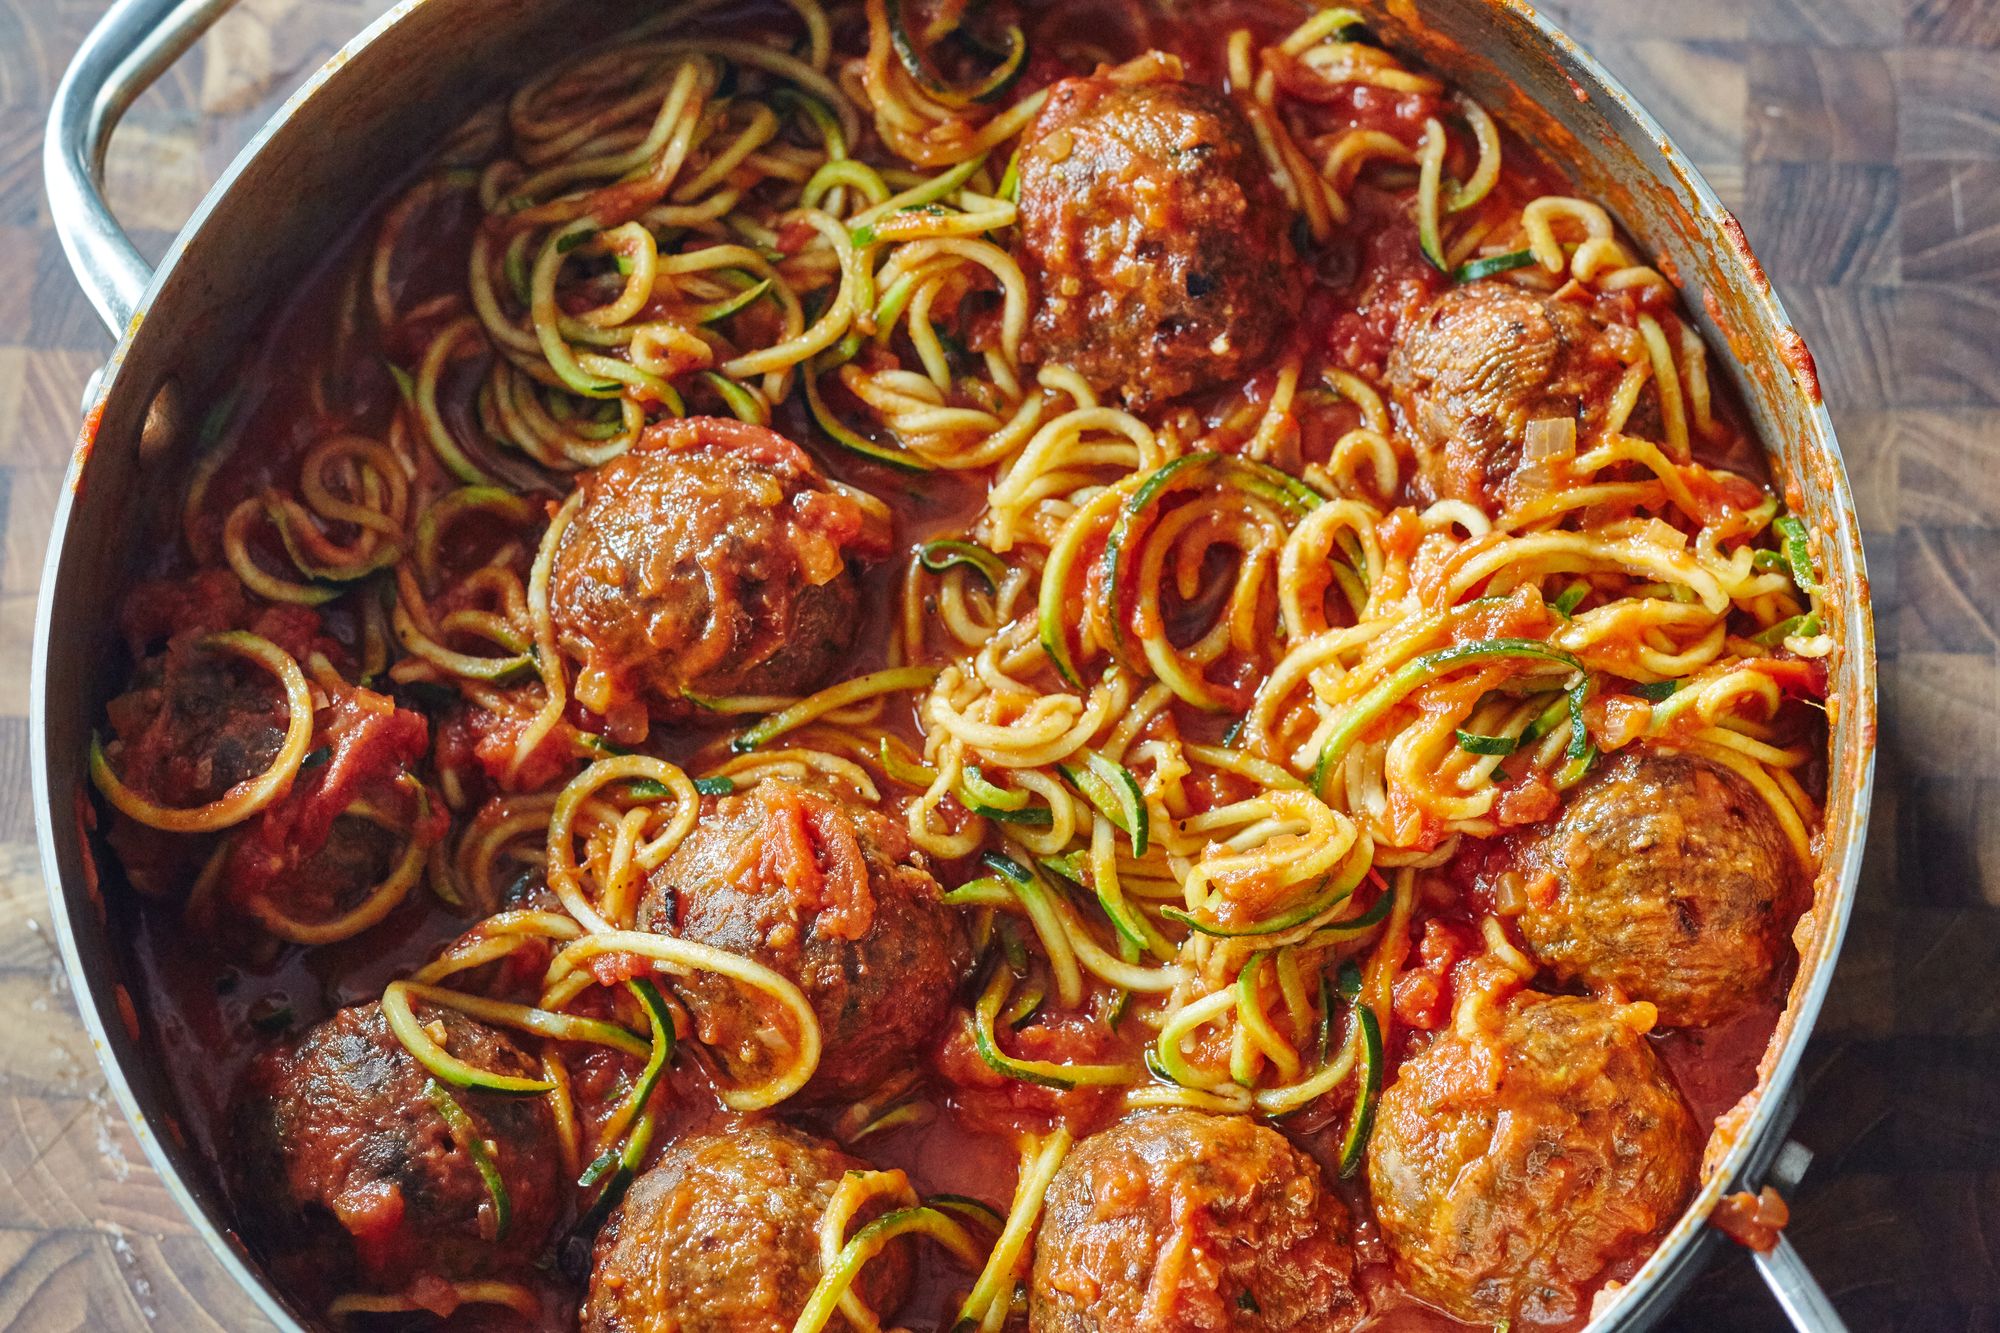 Tantalizing Zucchini Twirls: Delicate Zucchini Noodles Embrace Juicy Meatballs, Bathed in a Rich and Savory Sauce, Creating a Truly Gratifying Culinary Masterpiece.